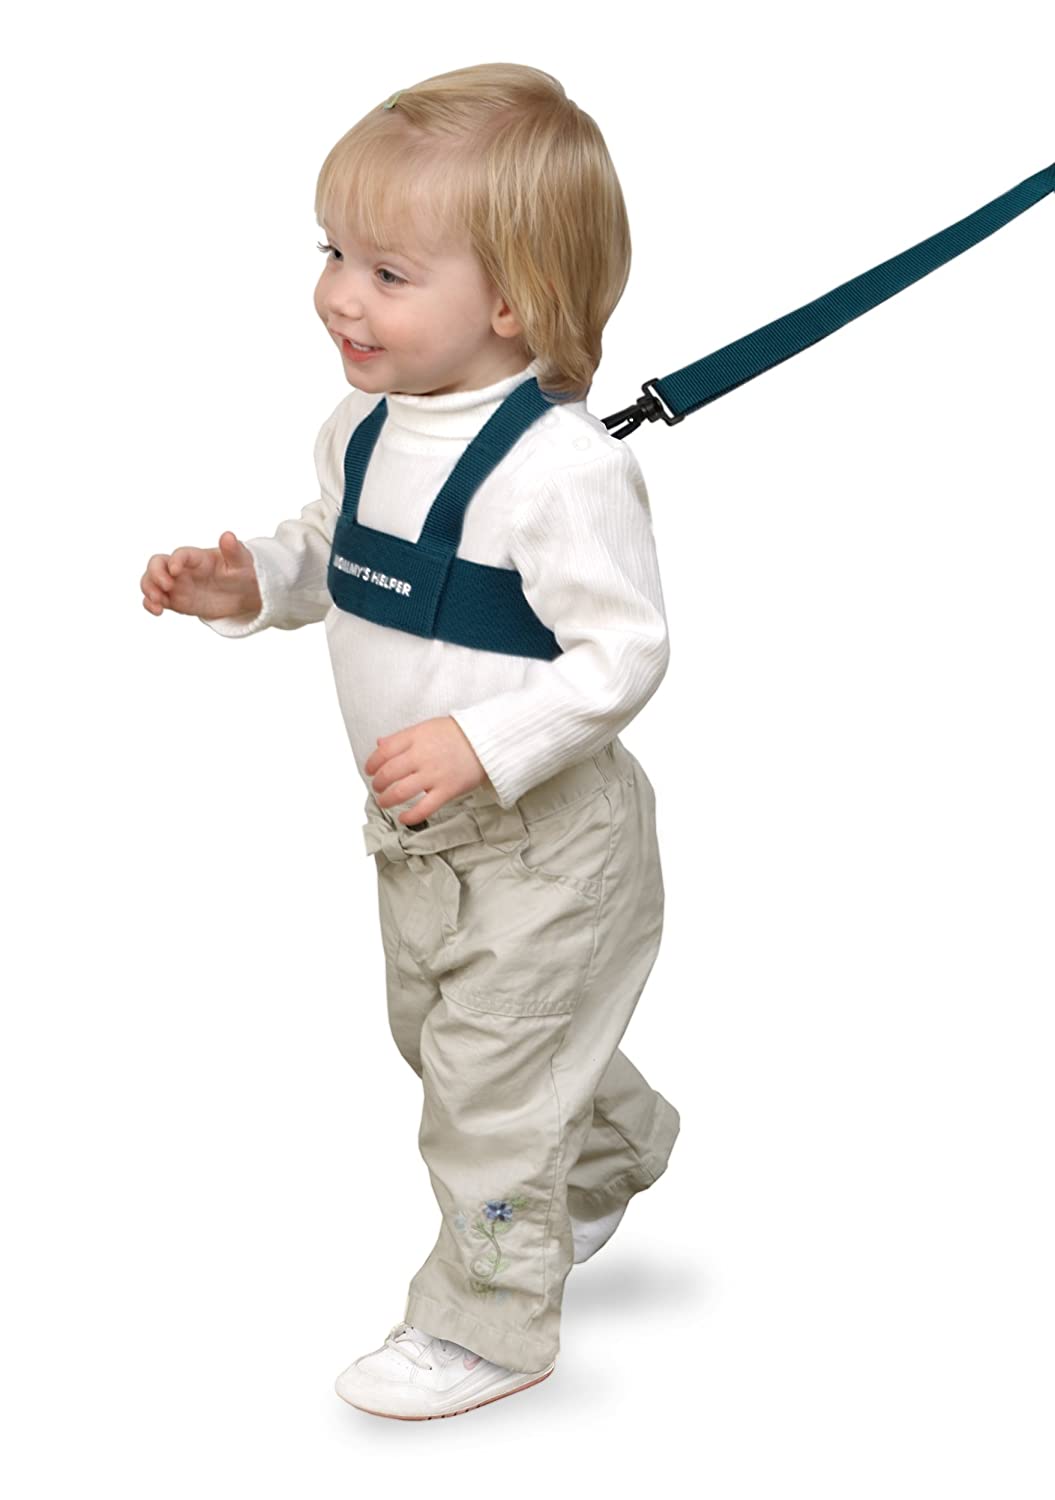 Top 7 Best Child Leashes, Backpacks, Straps & Harness Reviews in 2023 2